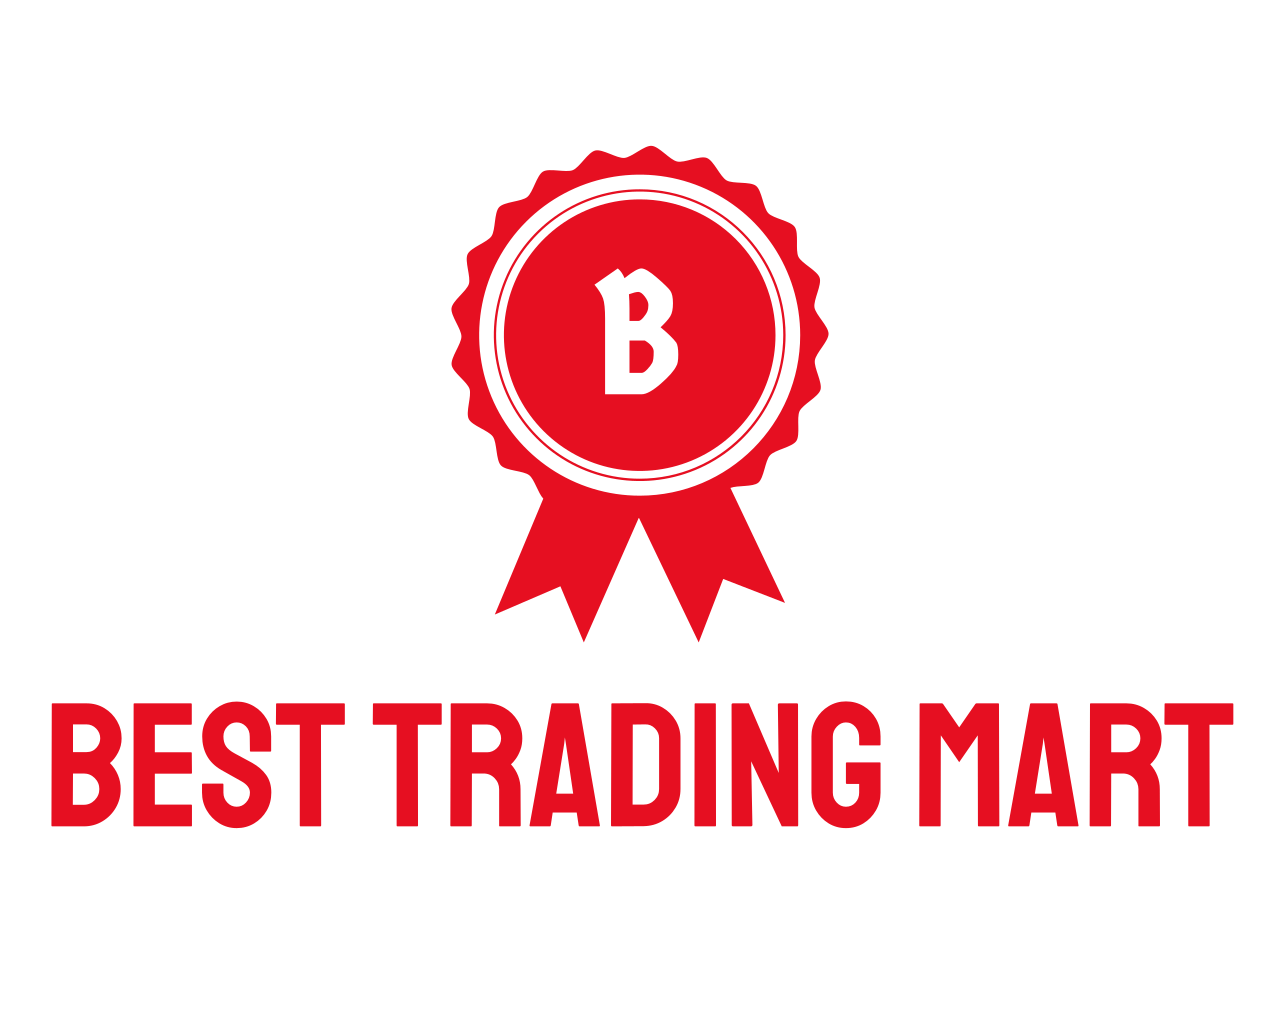 Lux trading mart